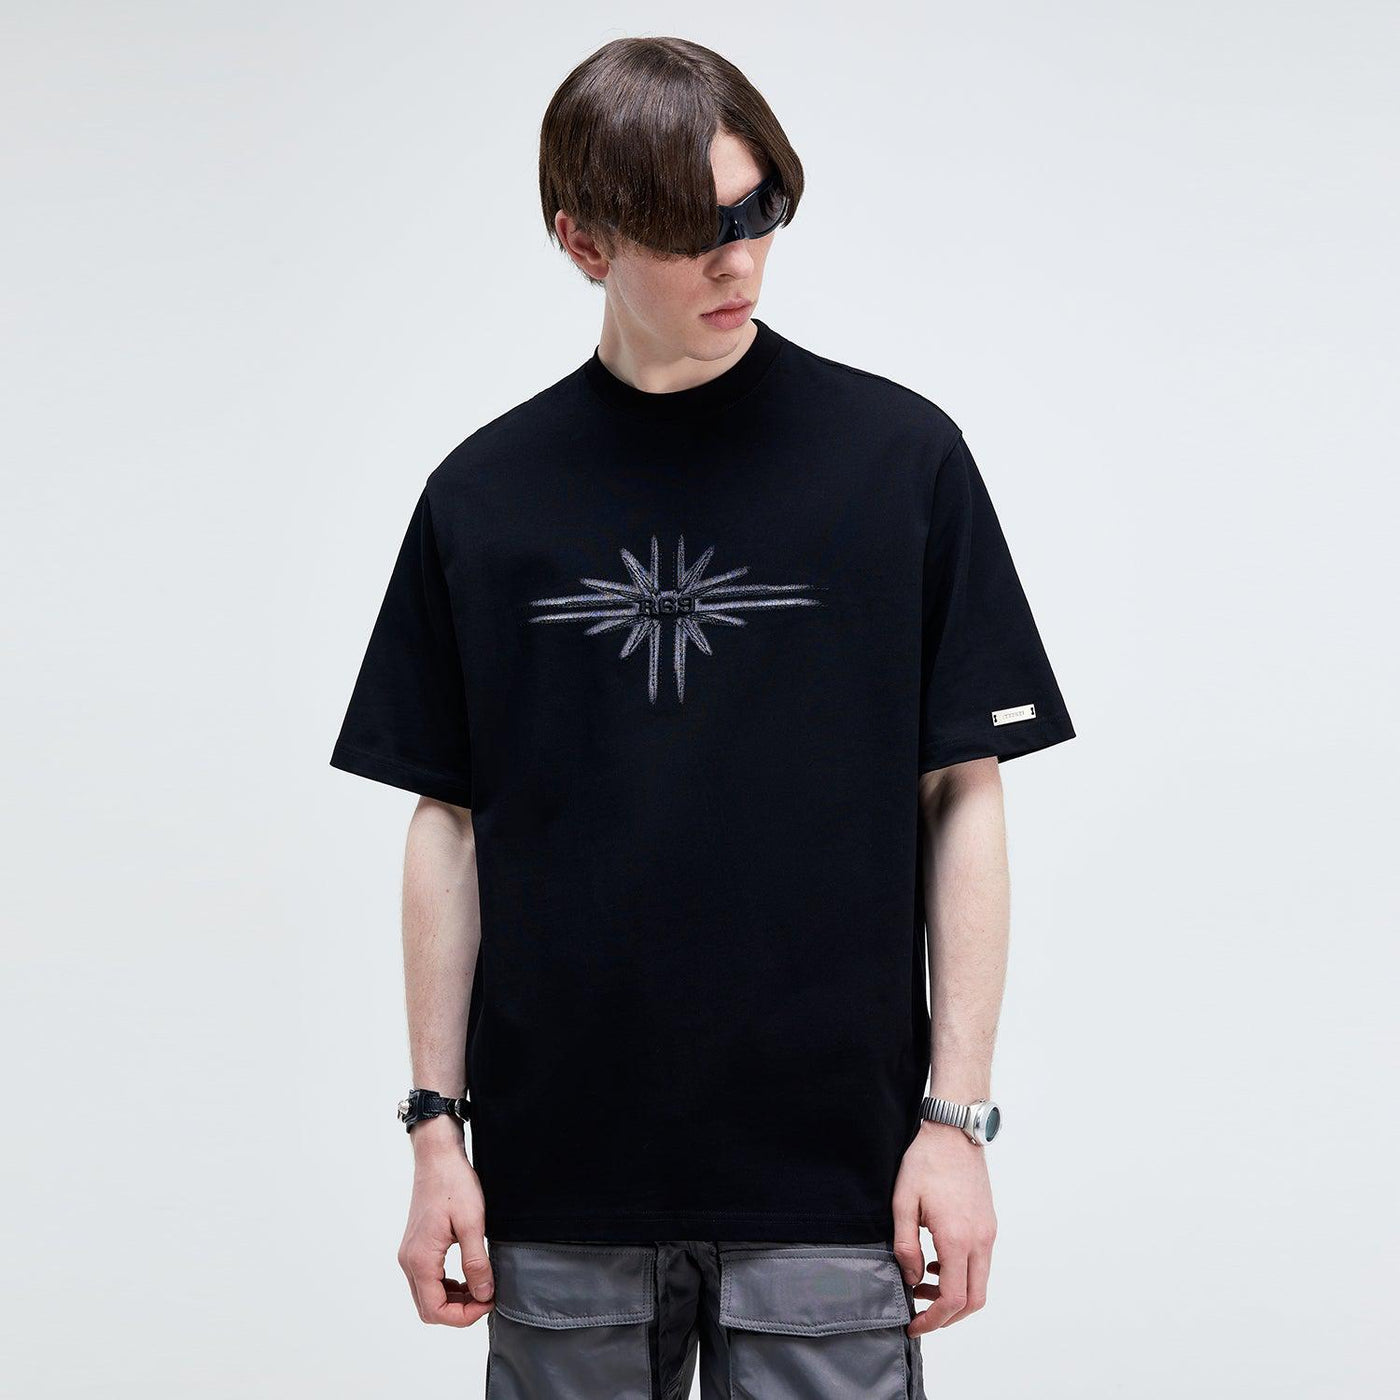 Logo Printed & Embroidered T-Shirt Korean Street Fashion T-Shirt By R69 Shop Online at OH Vault